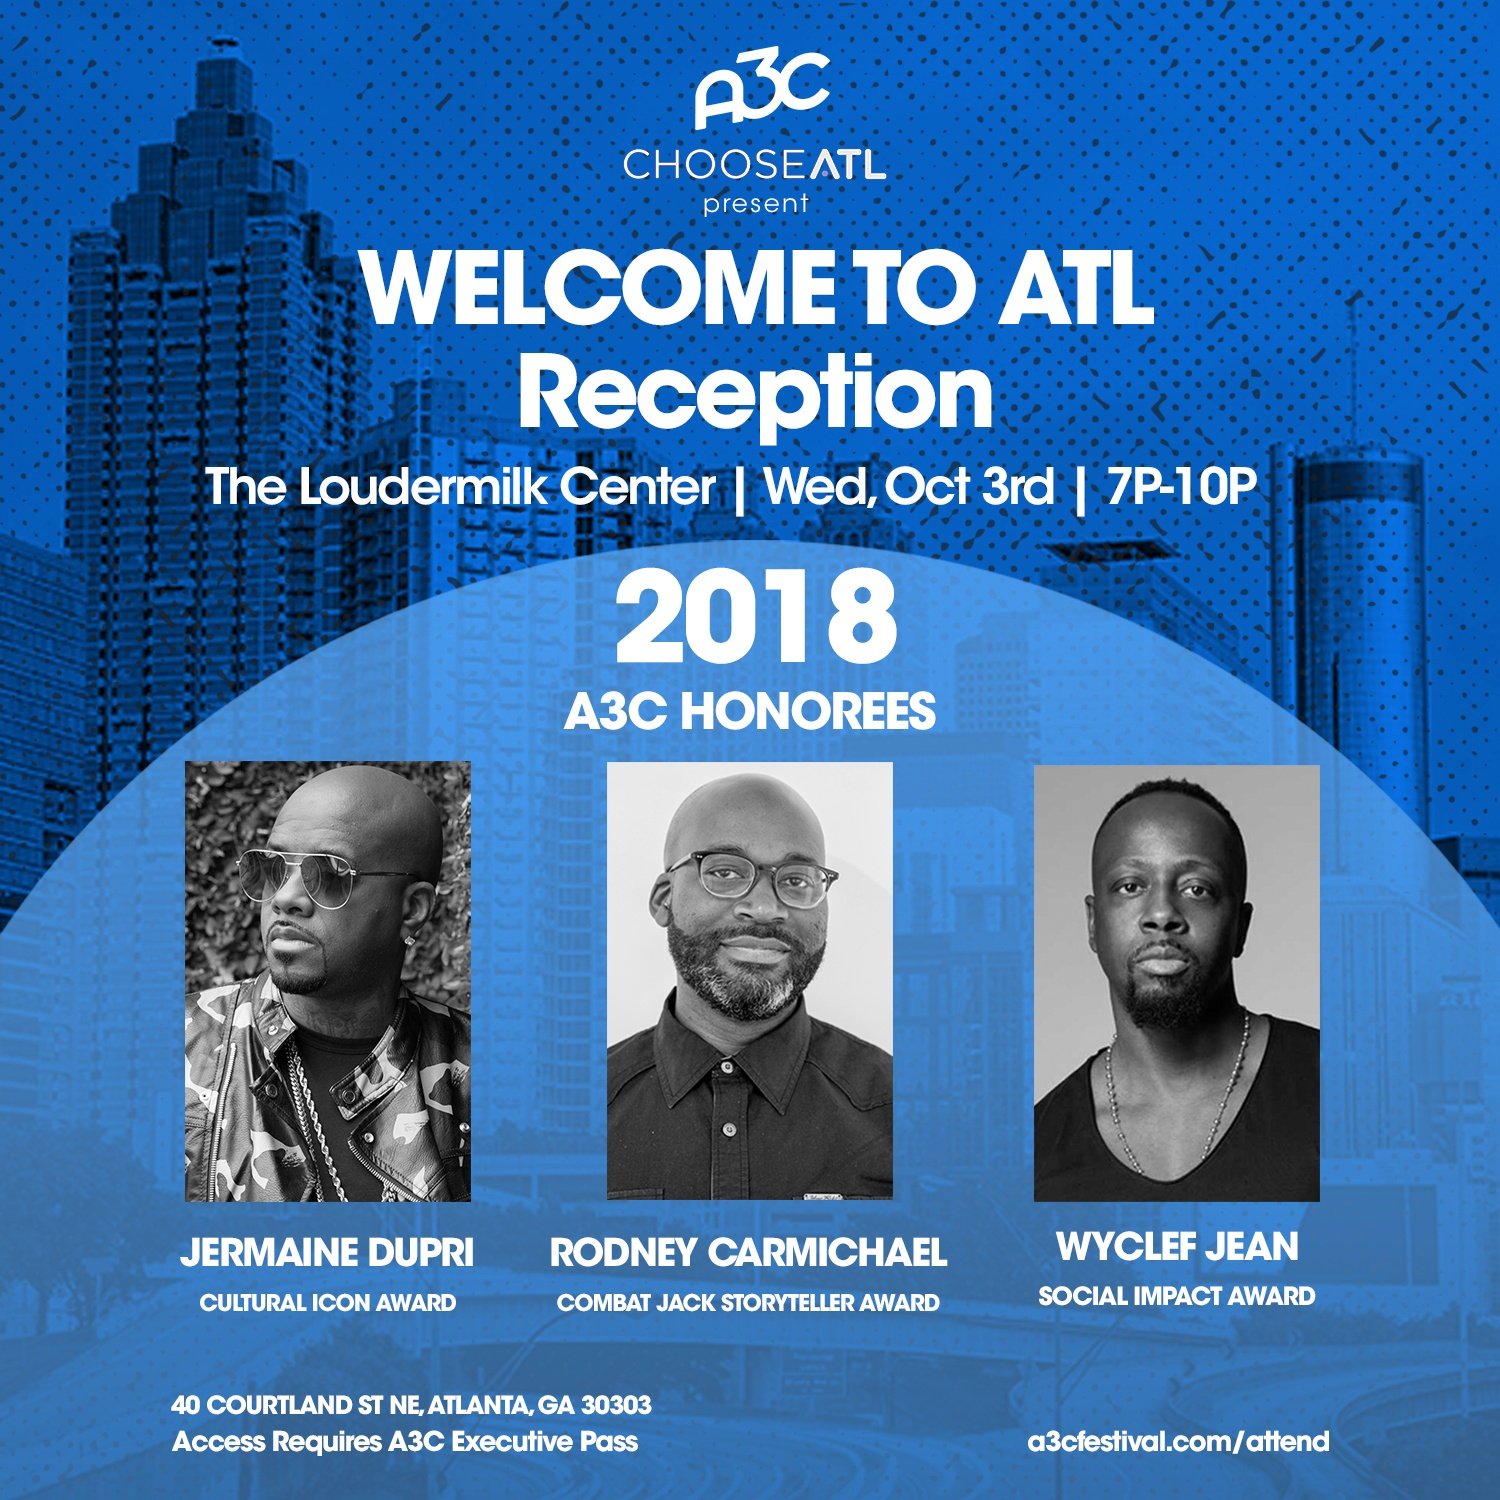 Welcome Reception ATL - A3C 2018